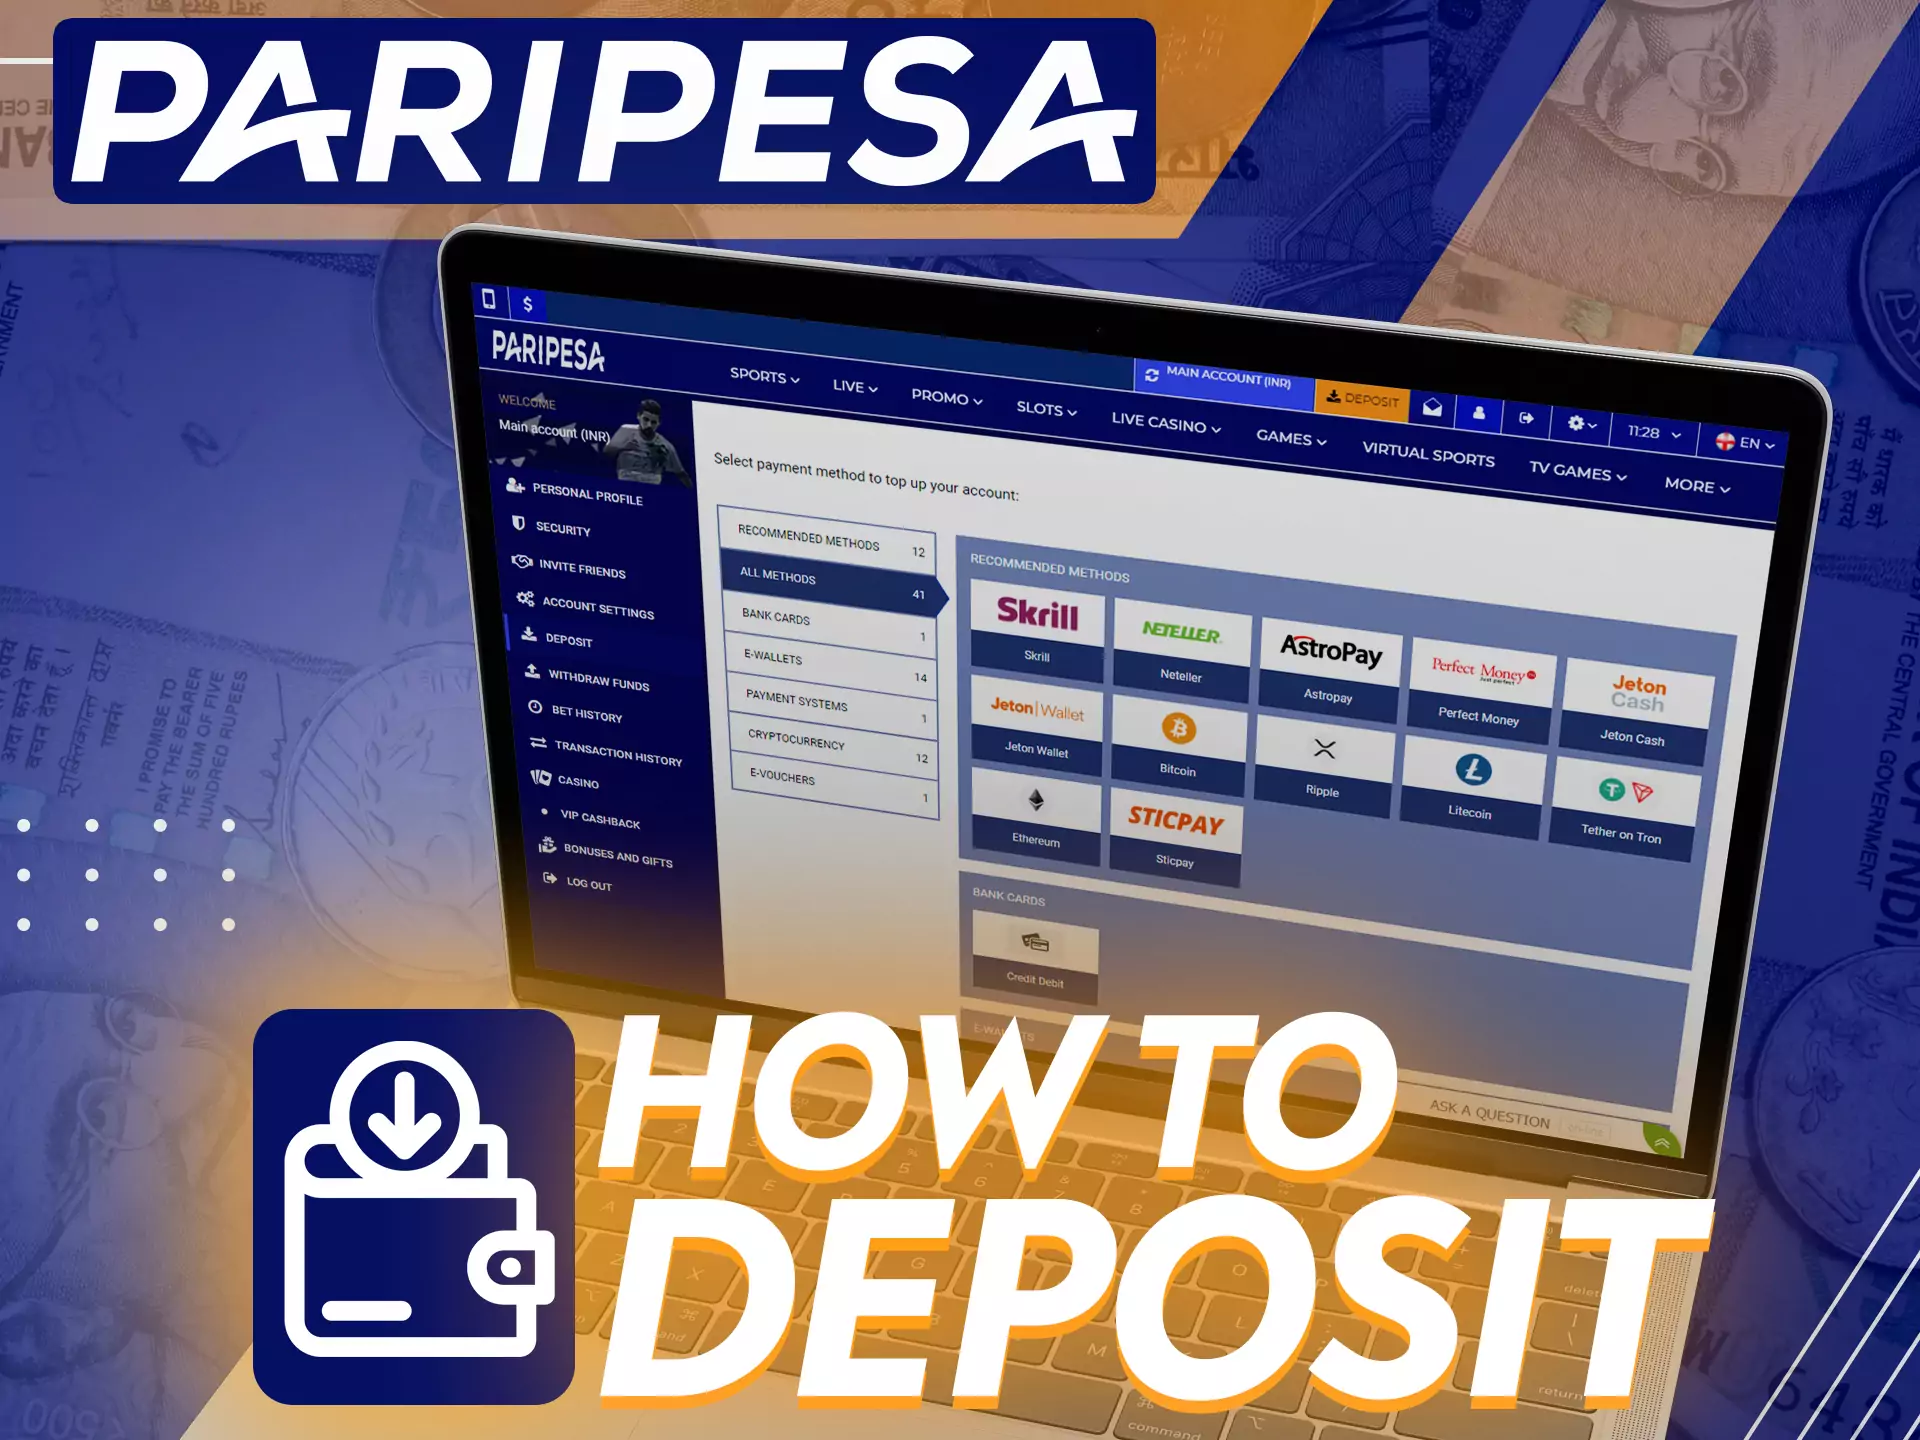 Paripesa has a very simple process to deposit money into your account.